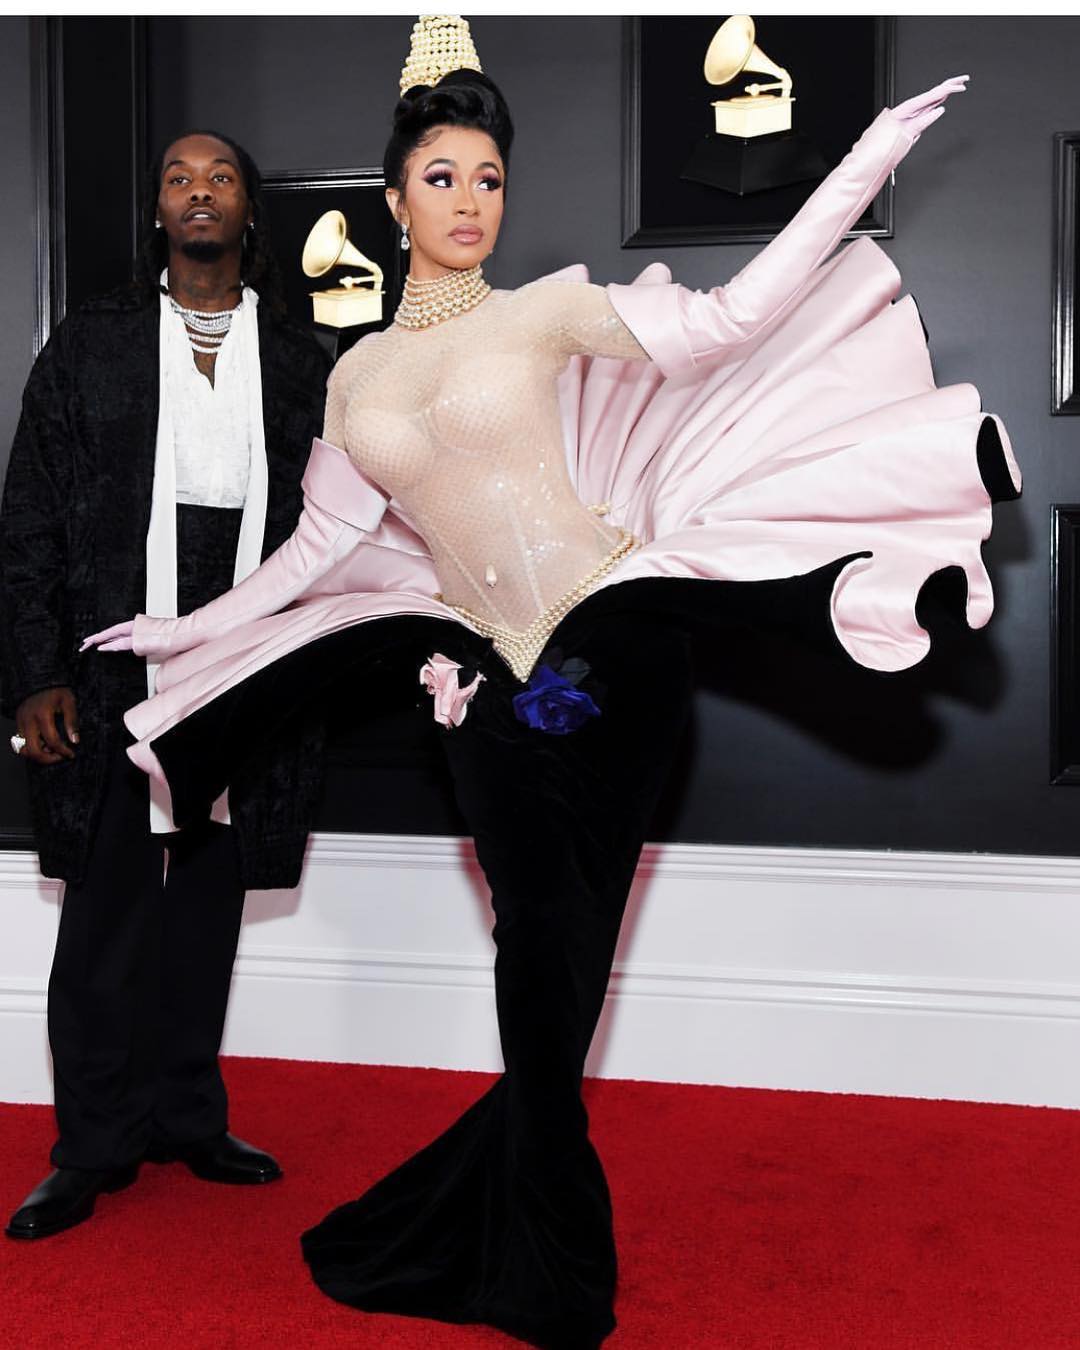 Cardi B attends a pink duchess and satin velvet Venus sheath dress over a blush embellished bodysuit from Thierry Mugler's fall winter 1995-1996 couture collection. Image courtesy of @muglerofficial